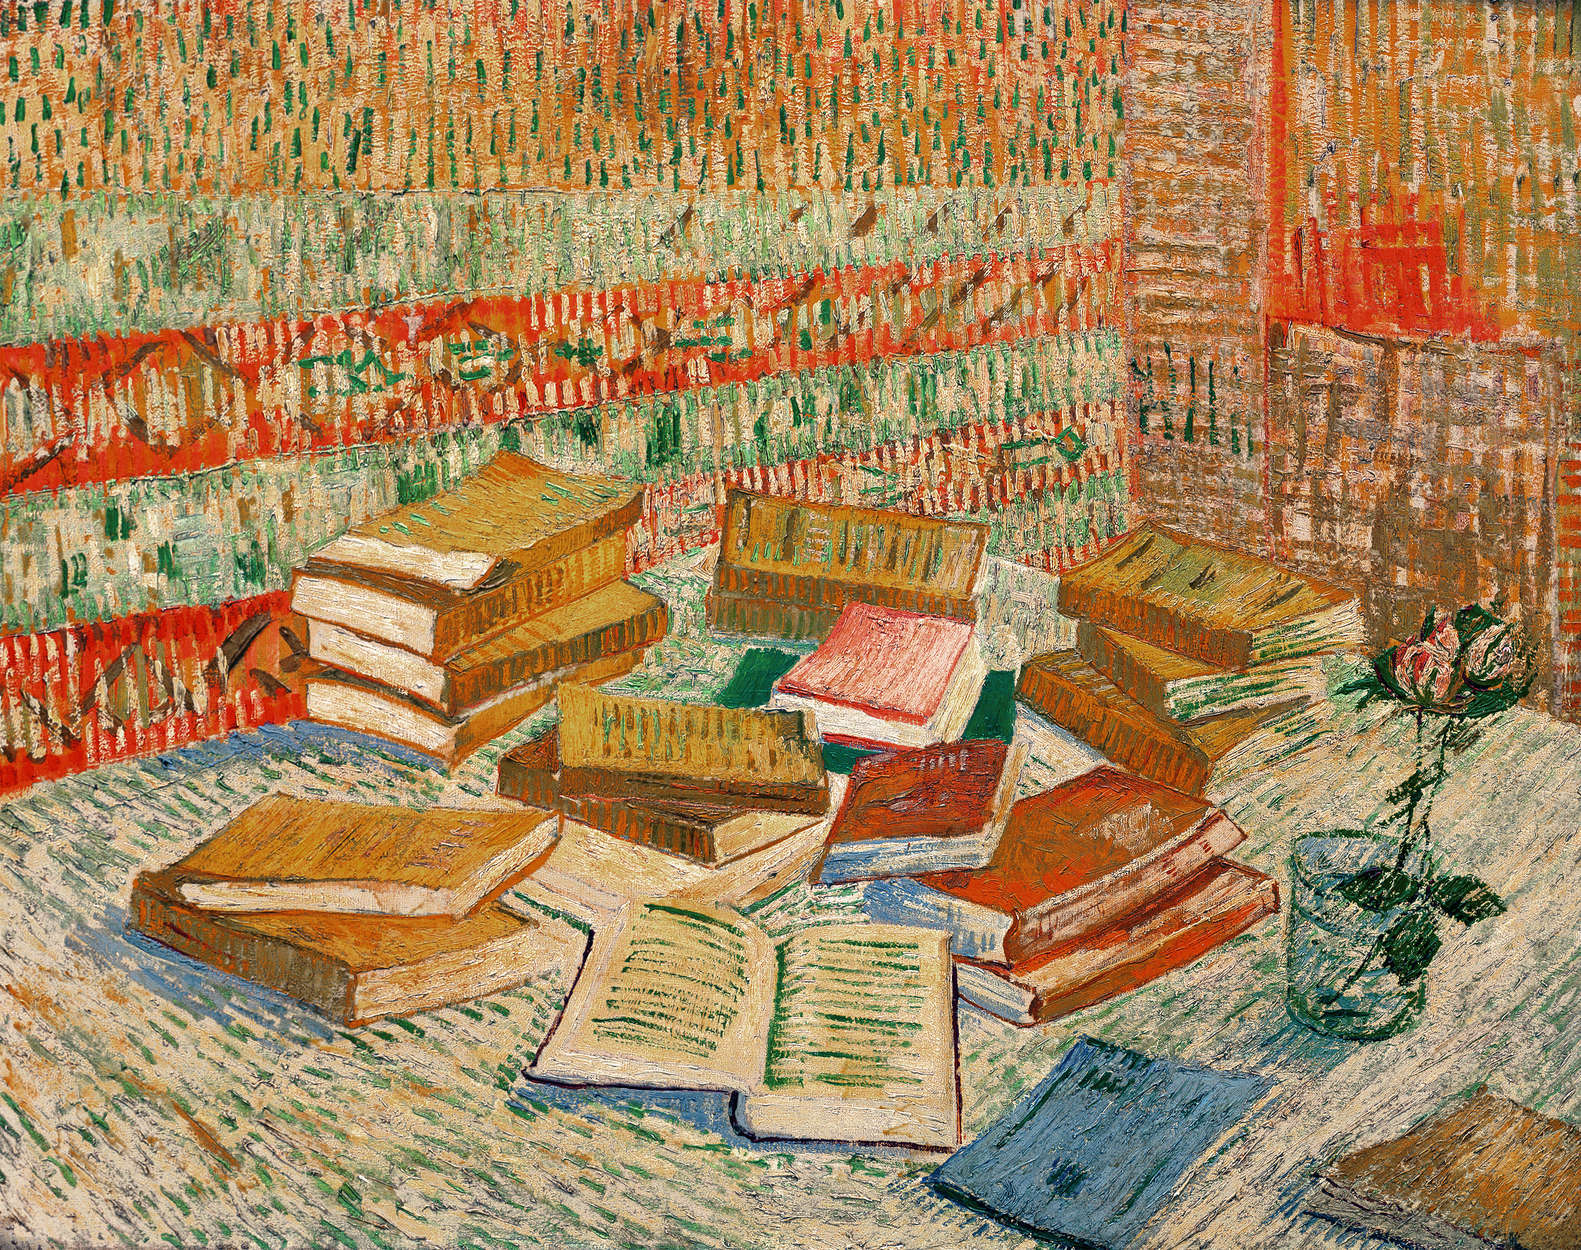             Photo wallpaper "The yellow books" by Vincent van Gogh
        